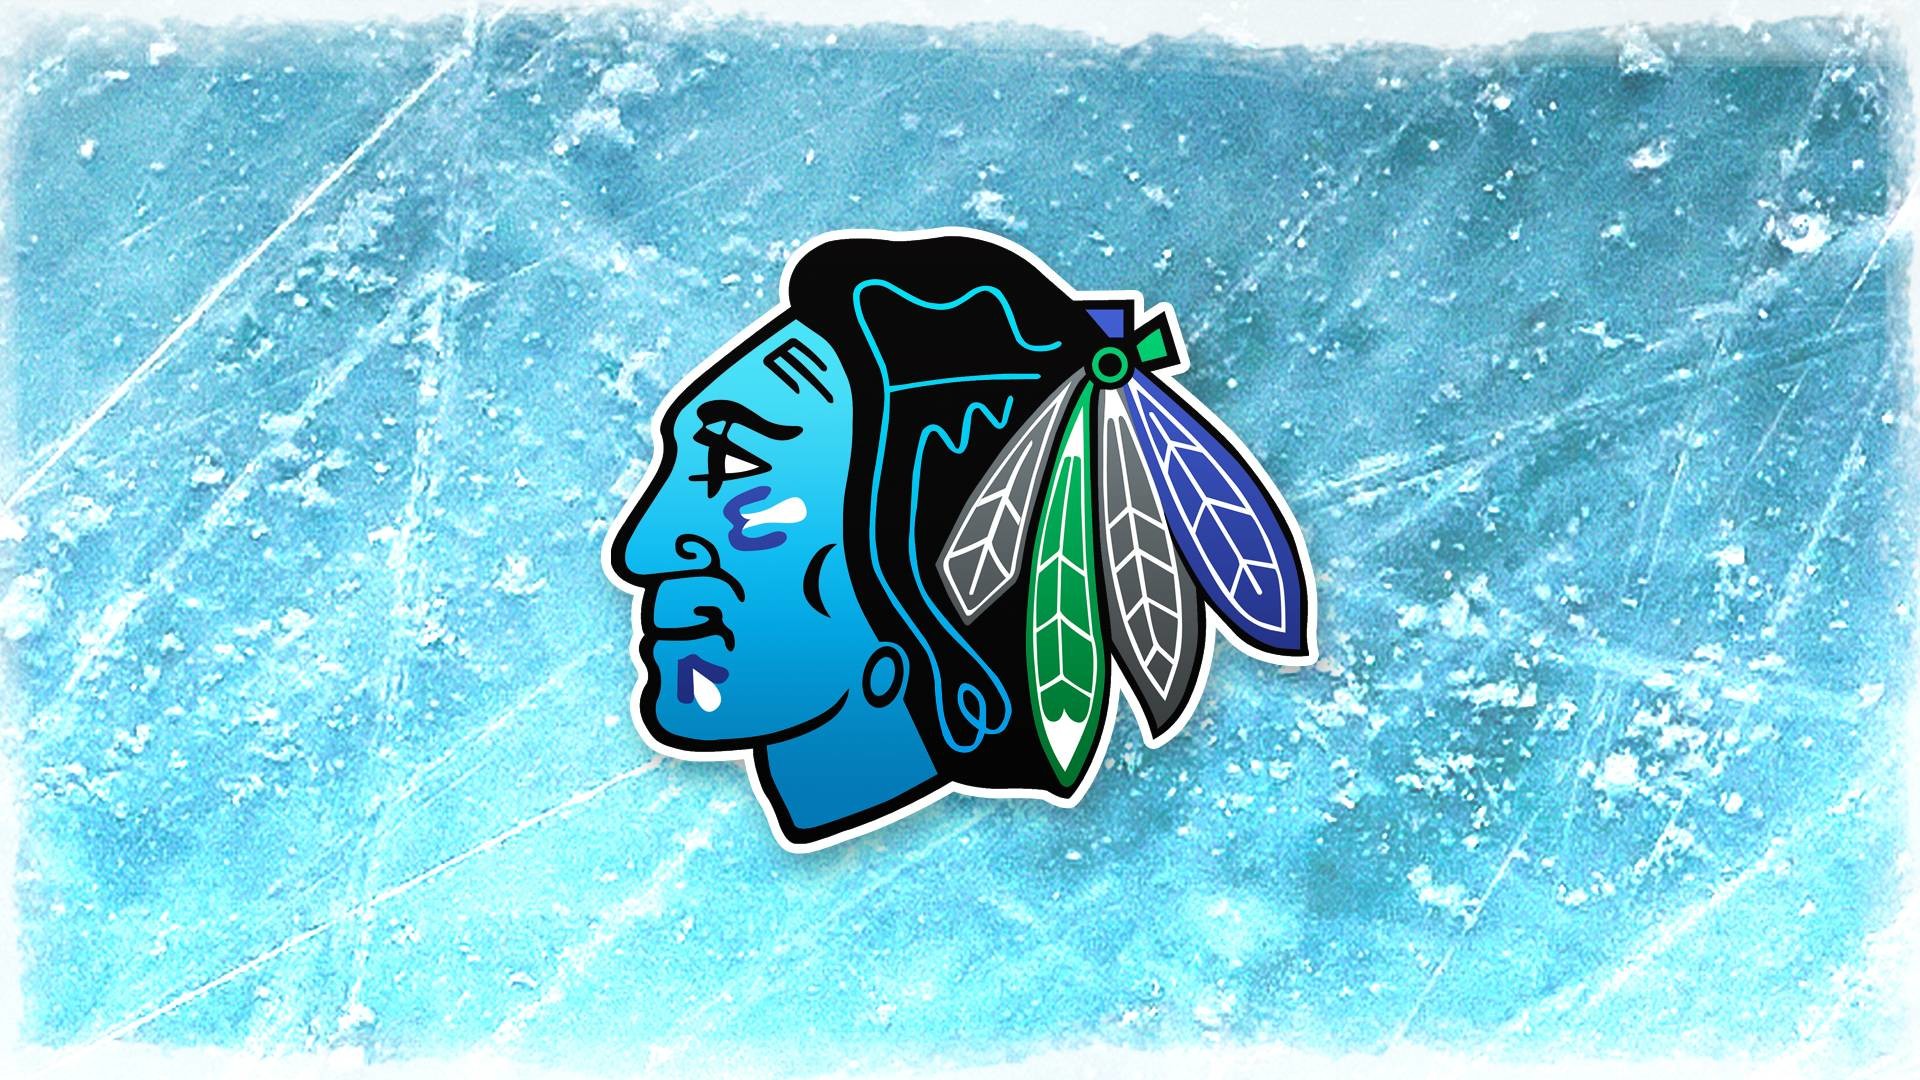 1920x1080 Chicago Bluehawks. My Blackhawks logo remix. Available as Wallpaper or  Print (links in comments) ...